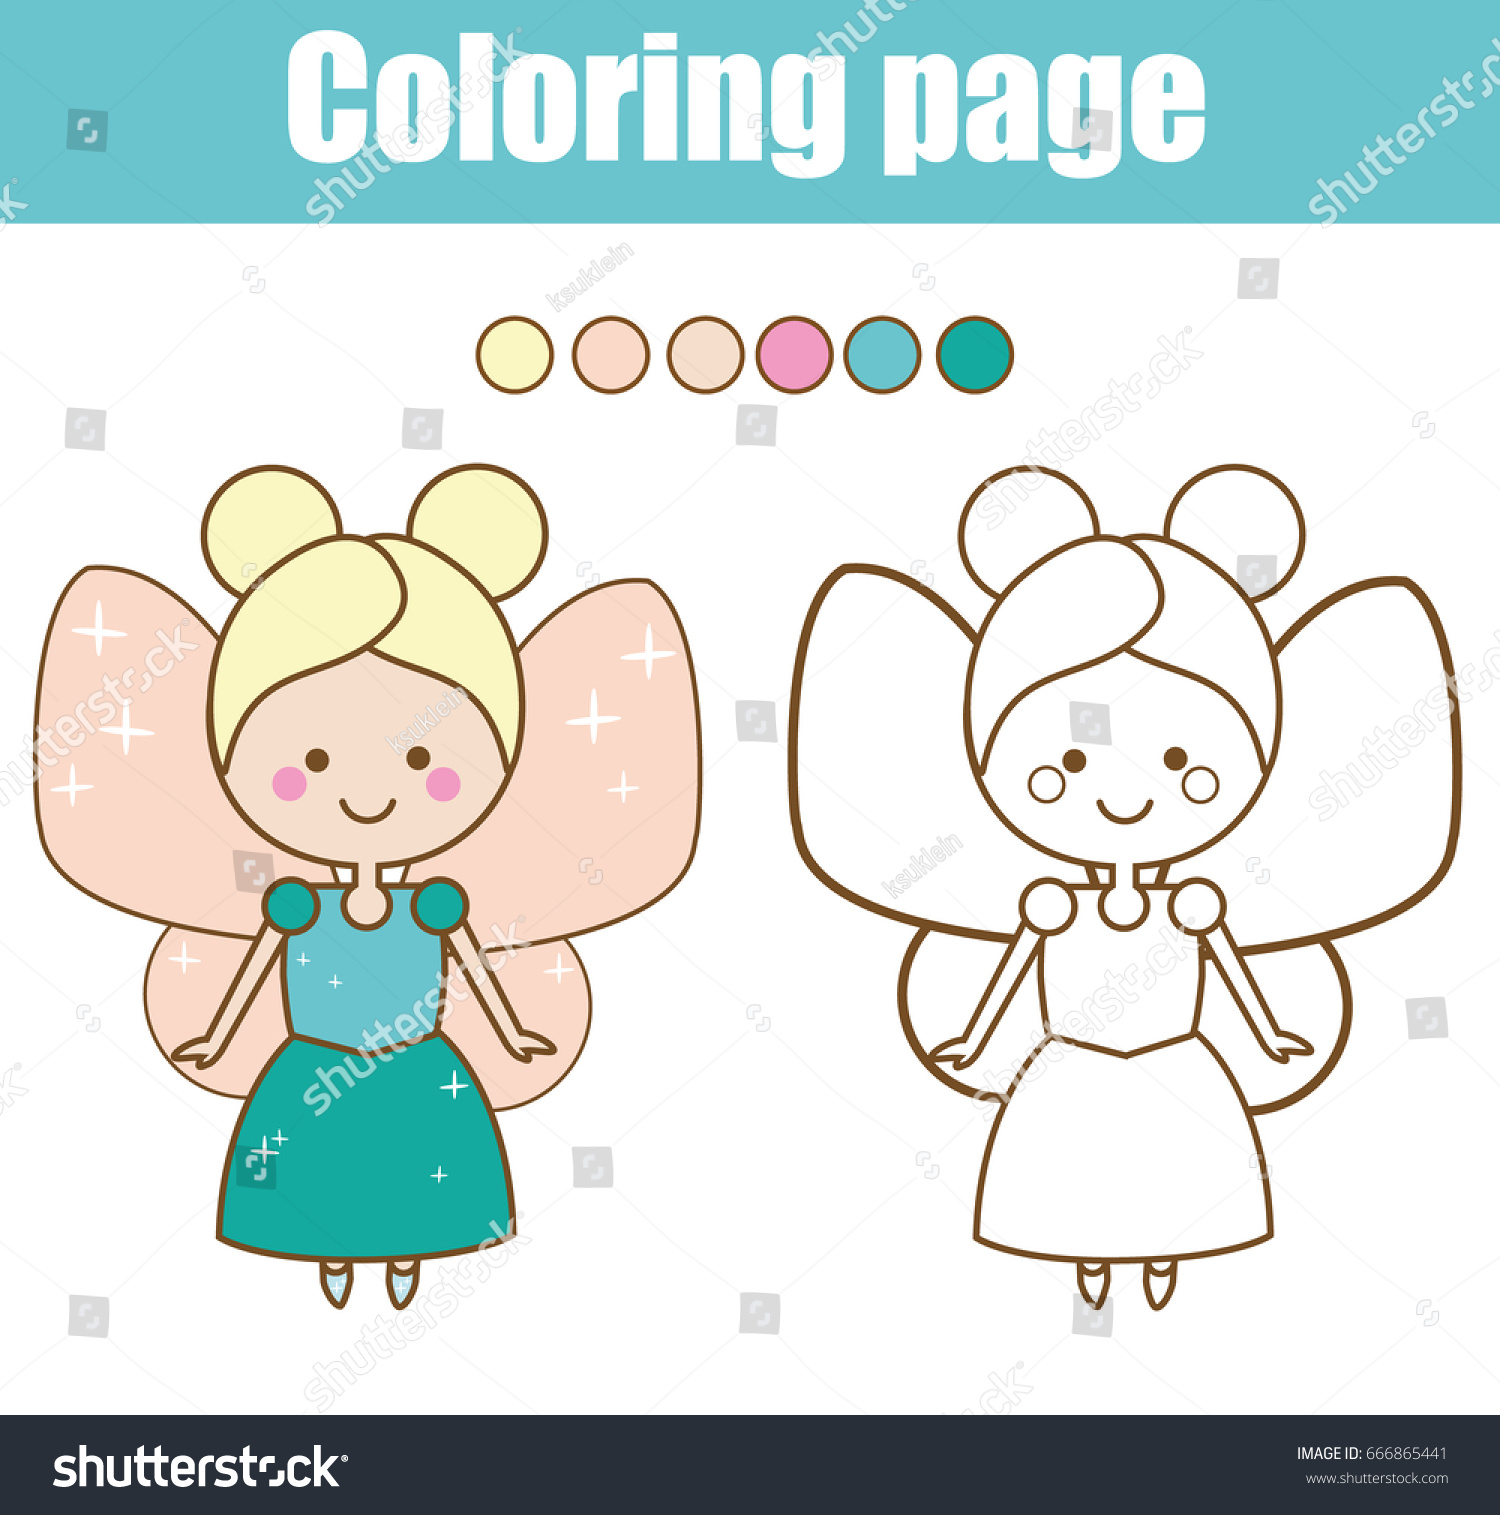 Coloring page with cute fairy character Color the picture Educational children game drawing